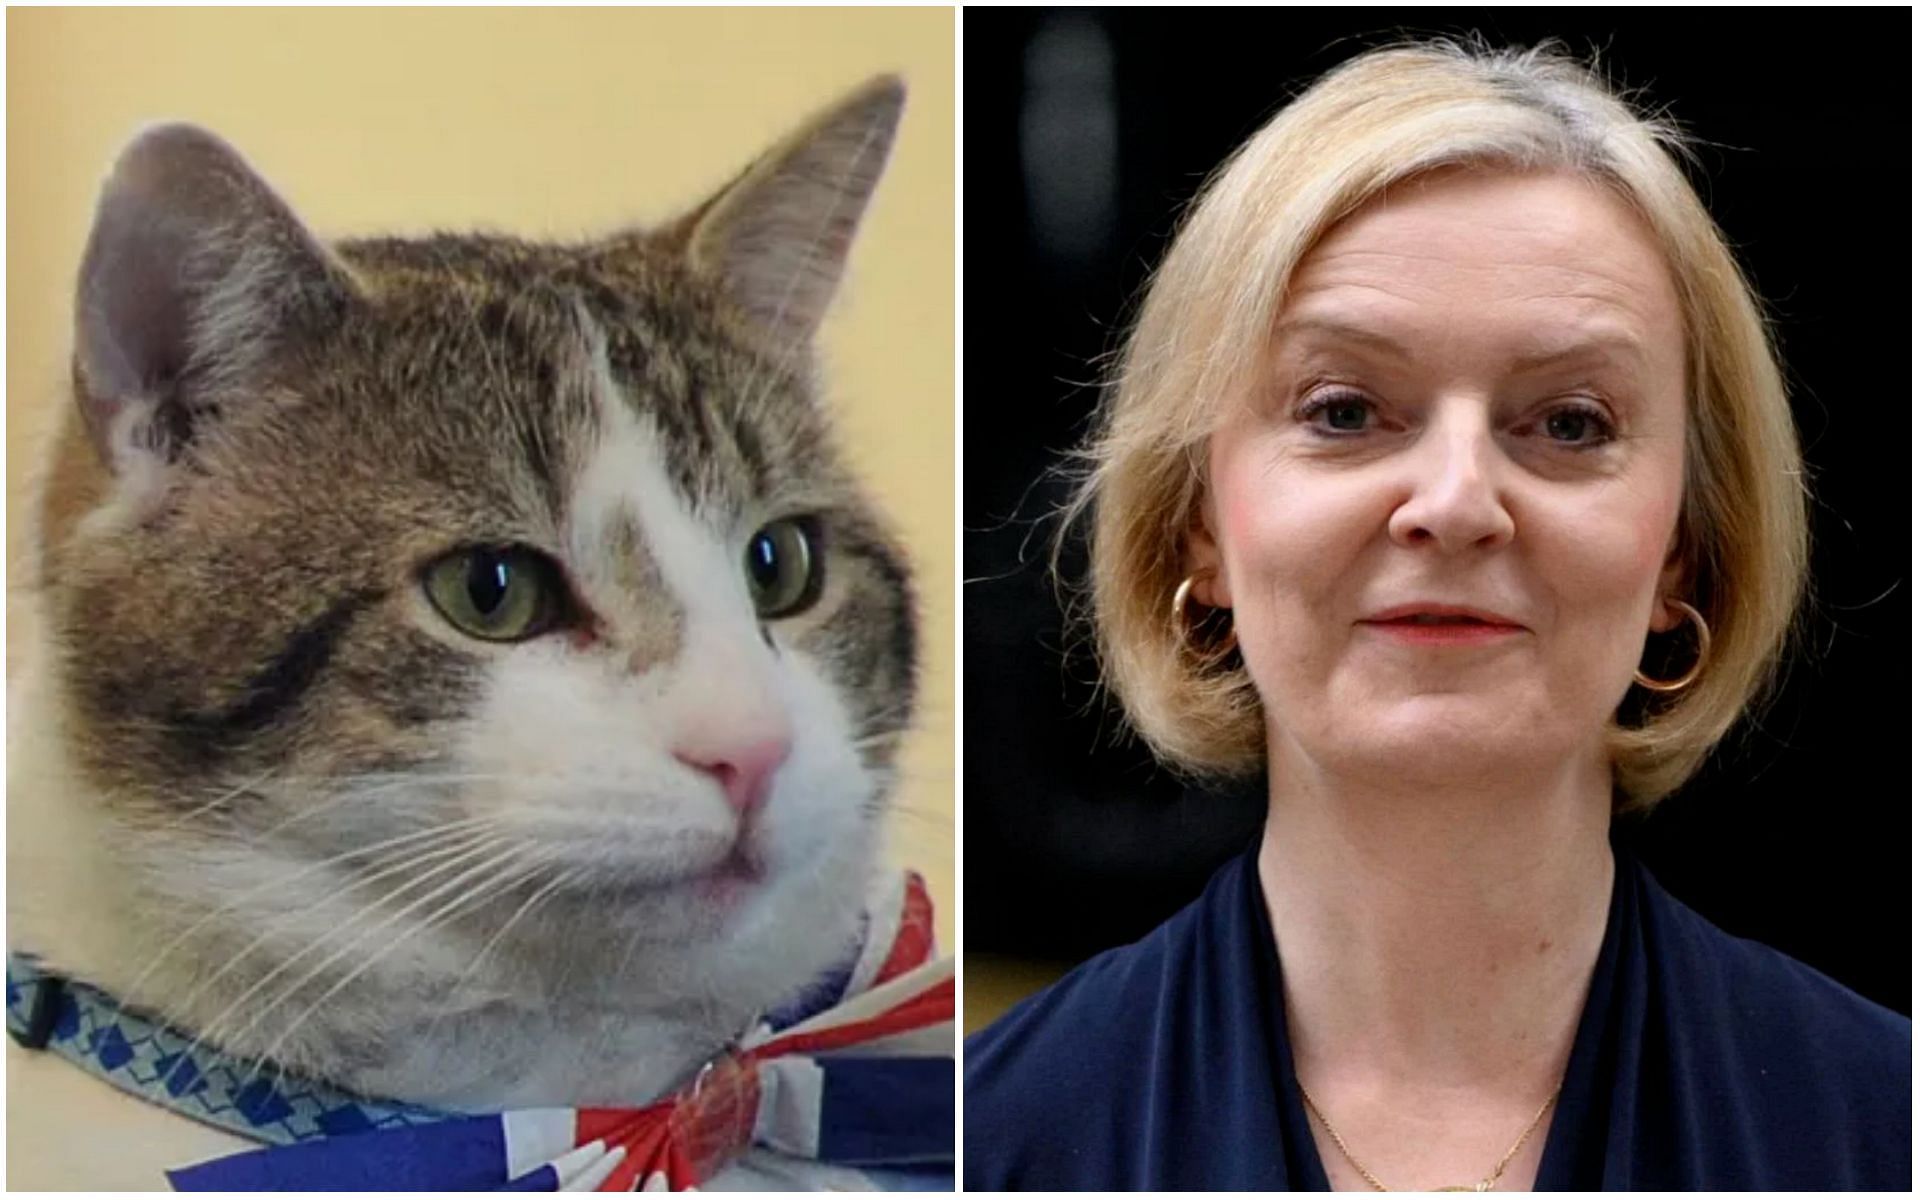 Netizens want Larry the Cat to be the next PM after Liz Truss